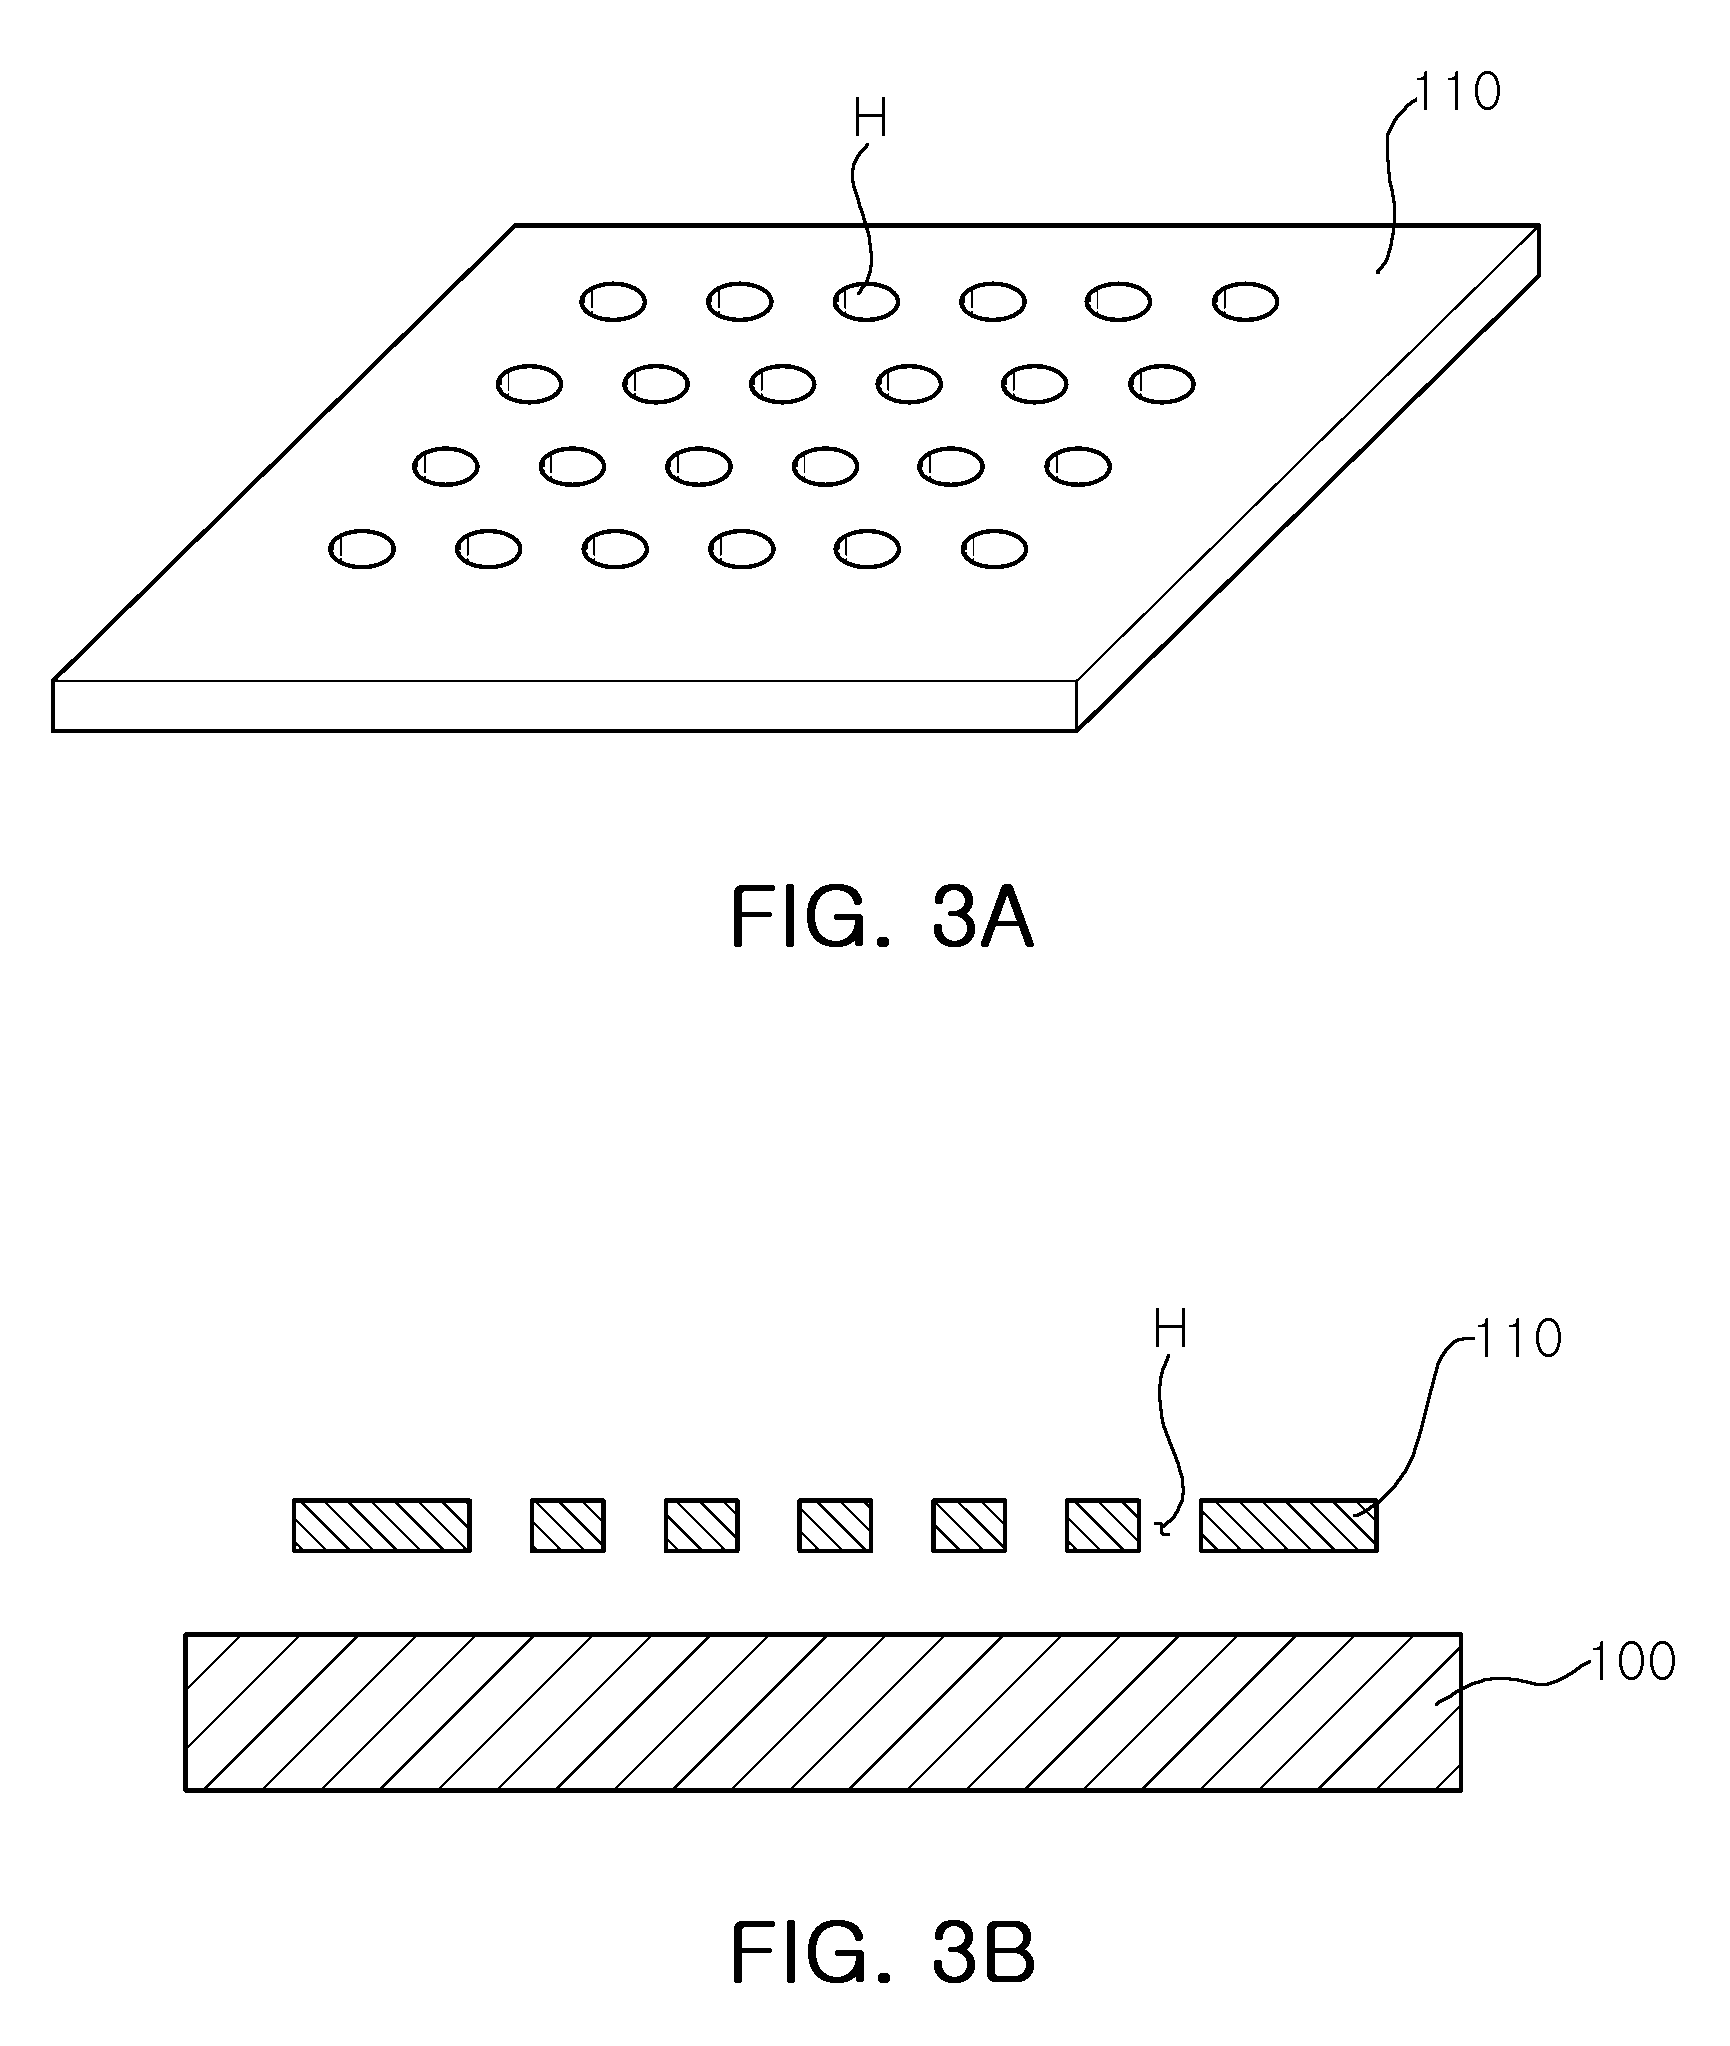 Method for fabricating ceramic substrate